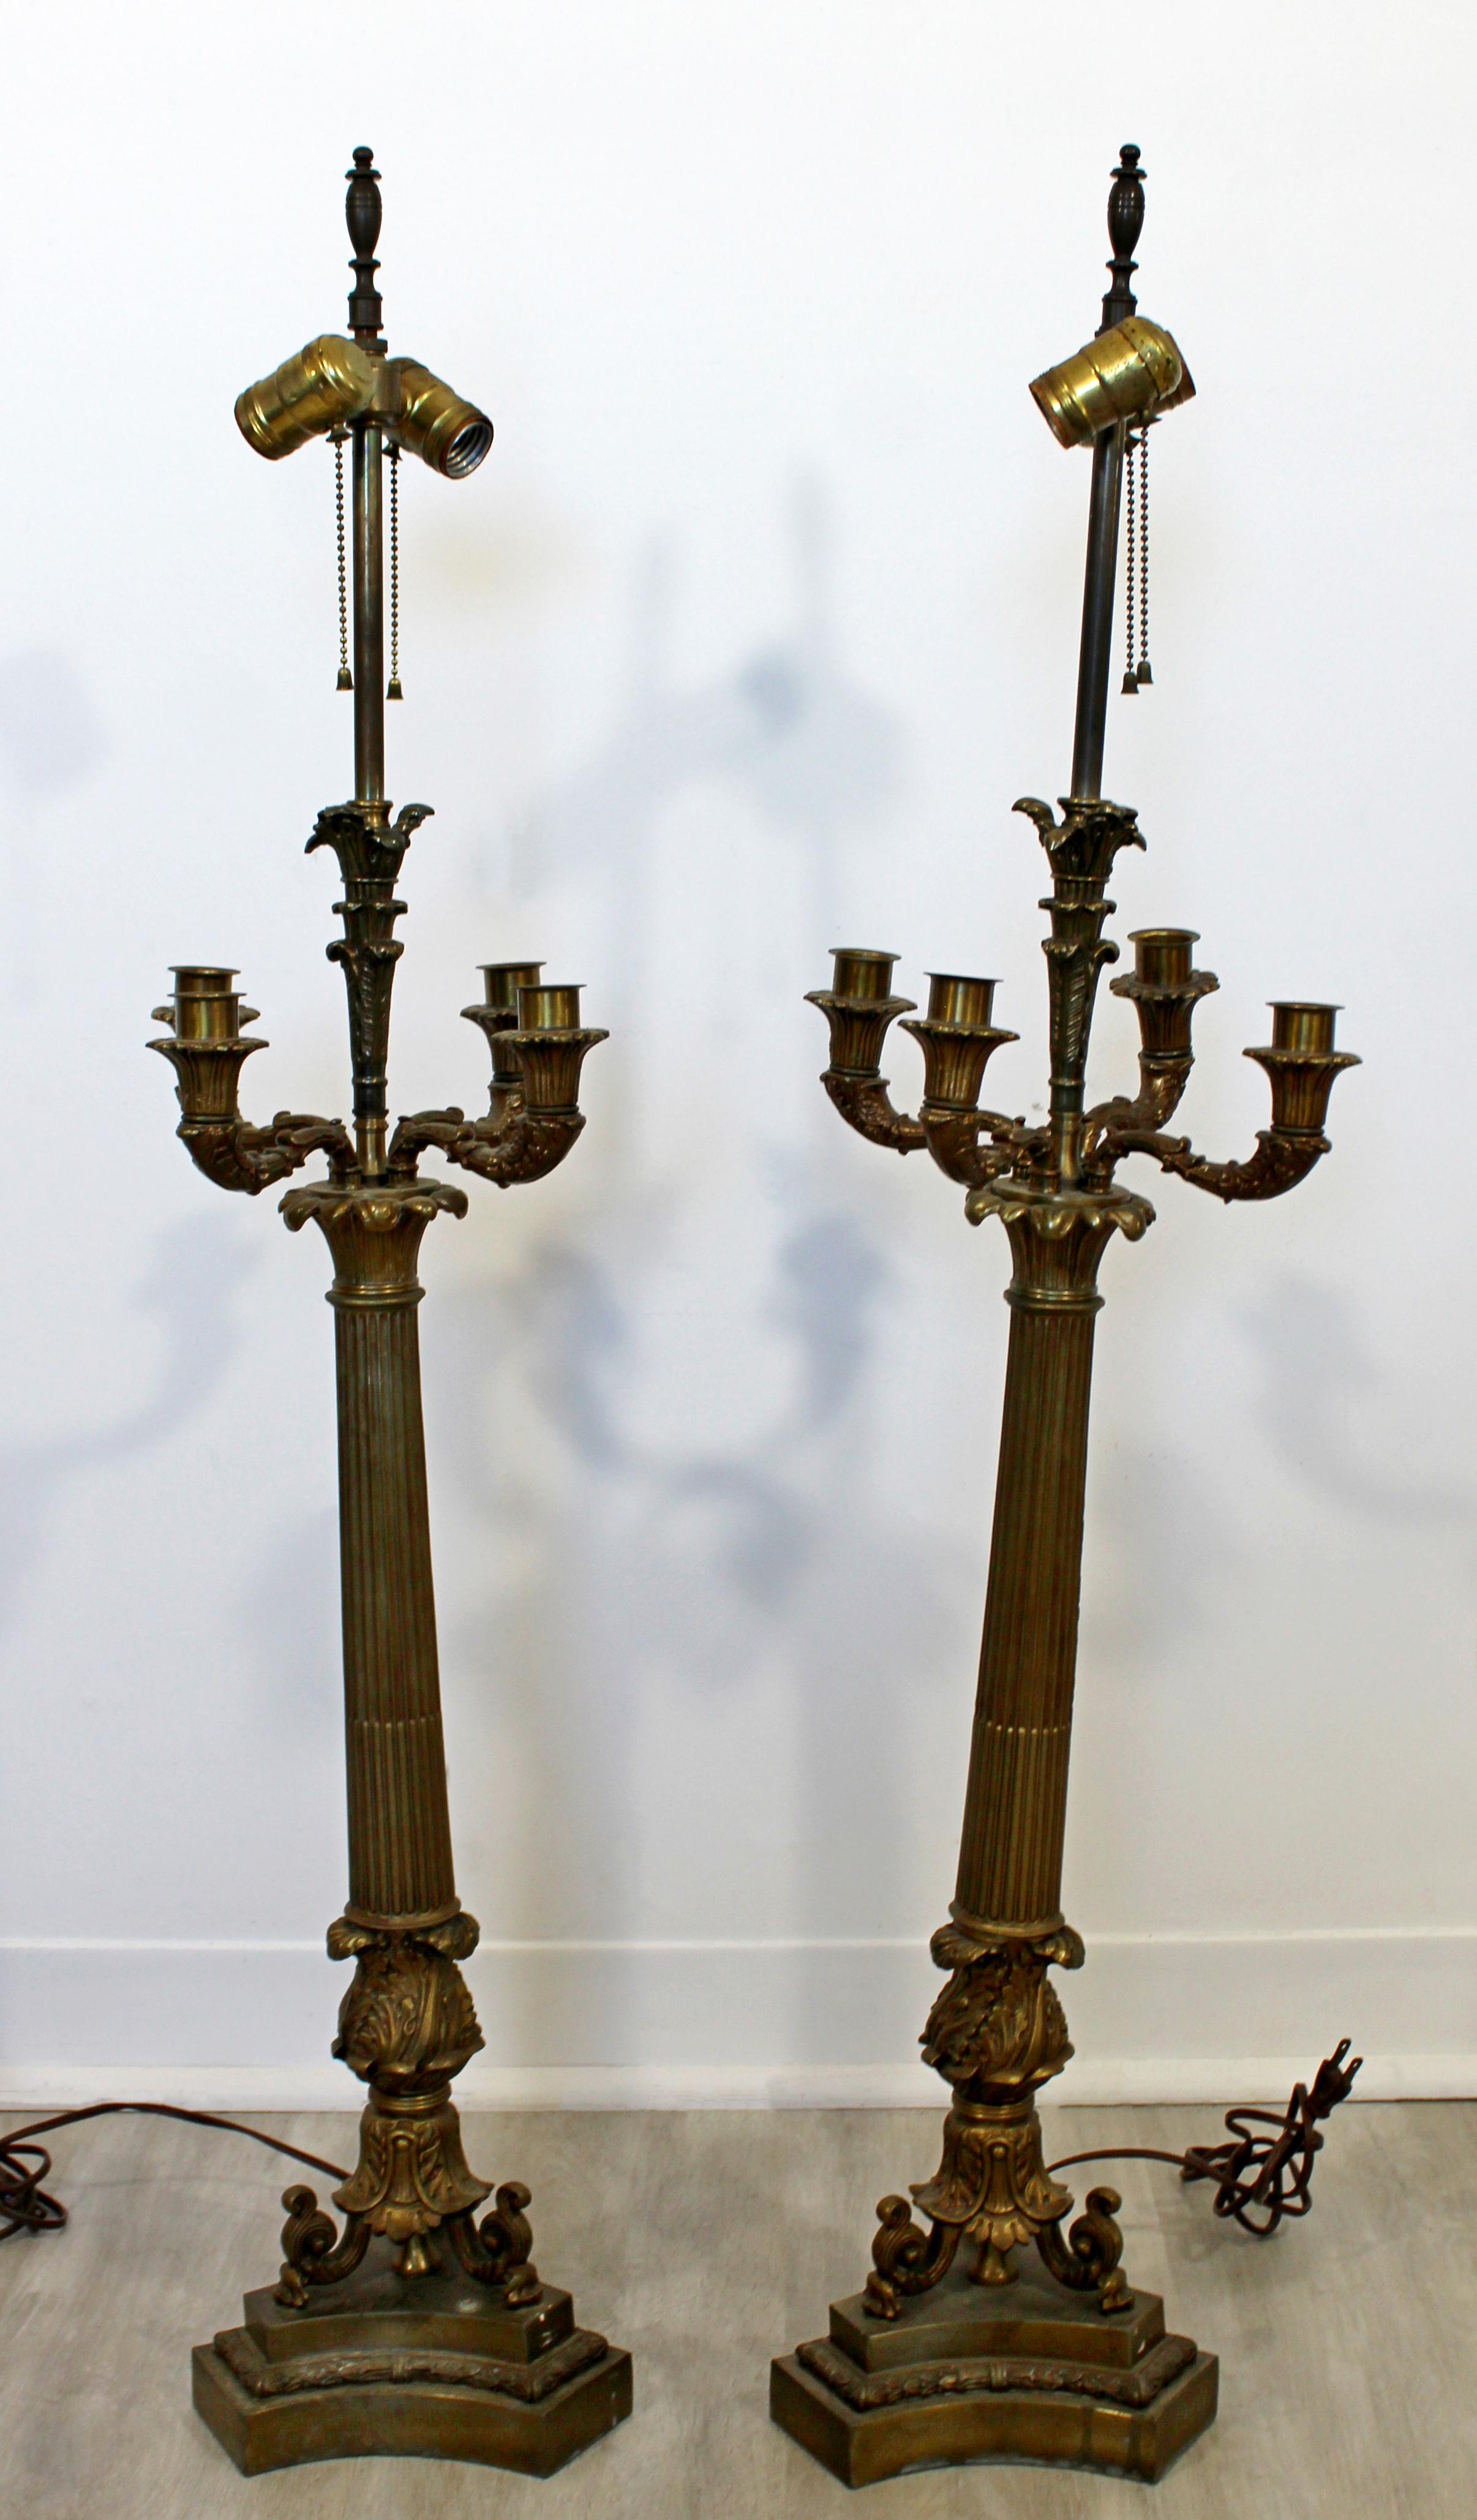 For your consideration is a magnificent pair of neoclassical bronze table lamps, by William Kessler, circa 1930s. In very good antique condition. The dimensions are 10